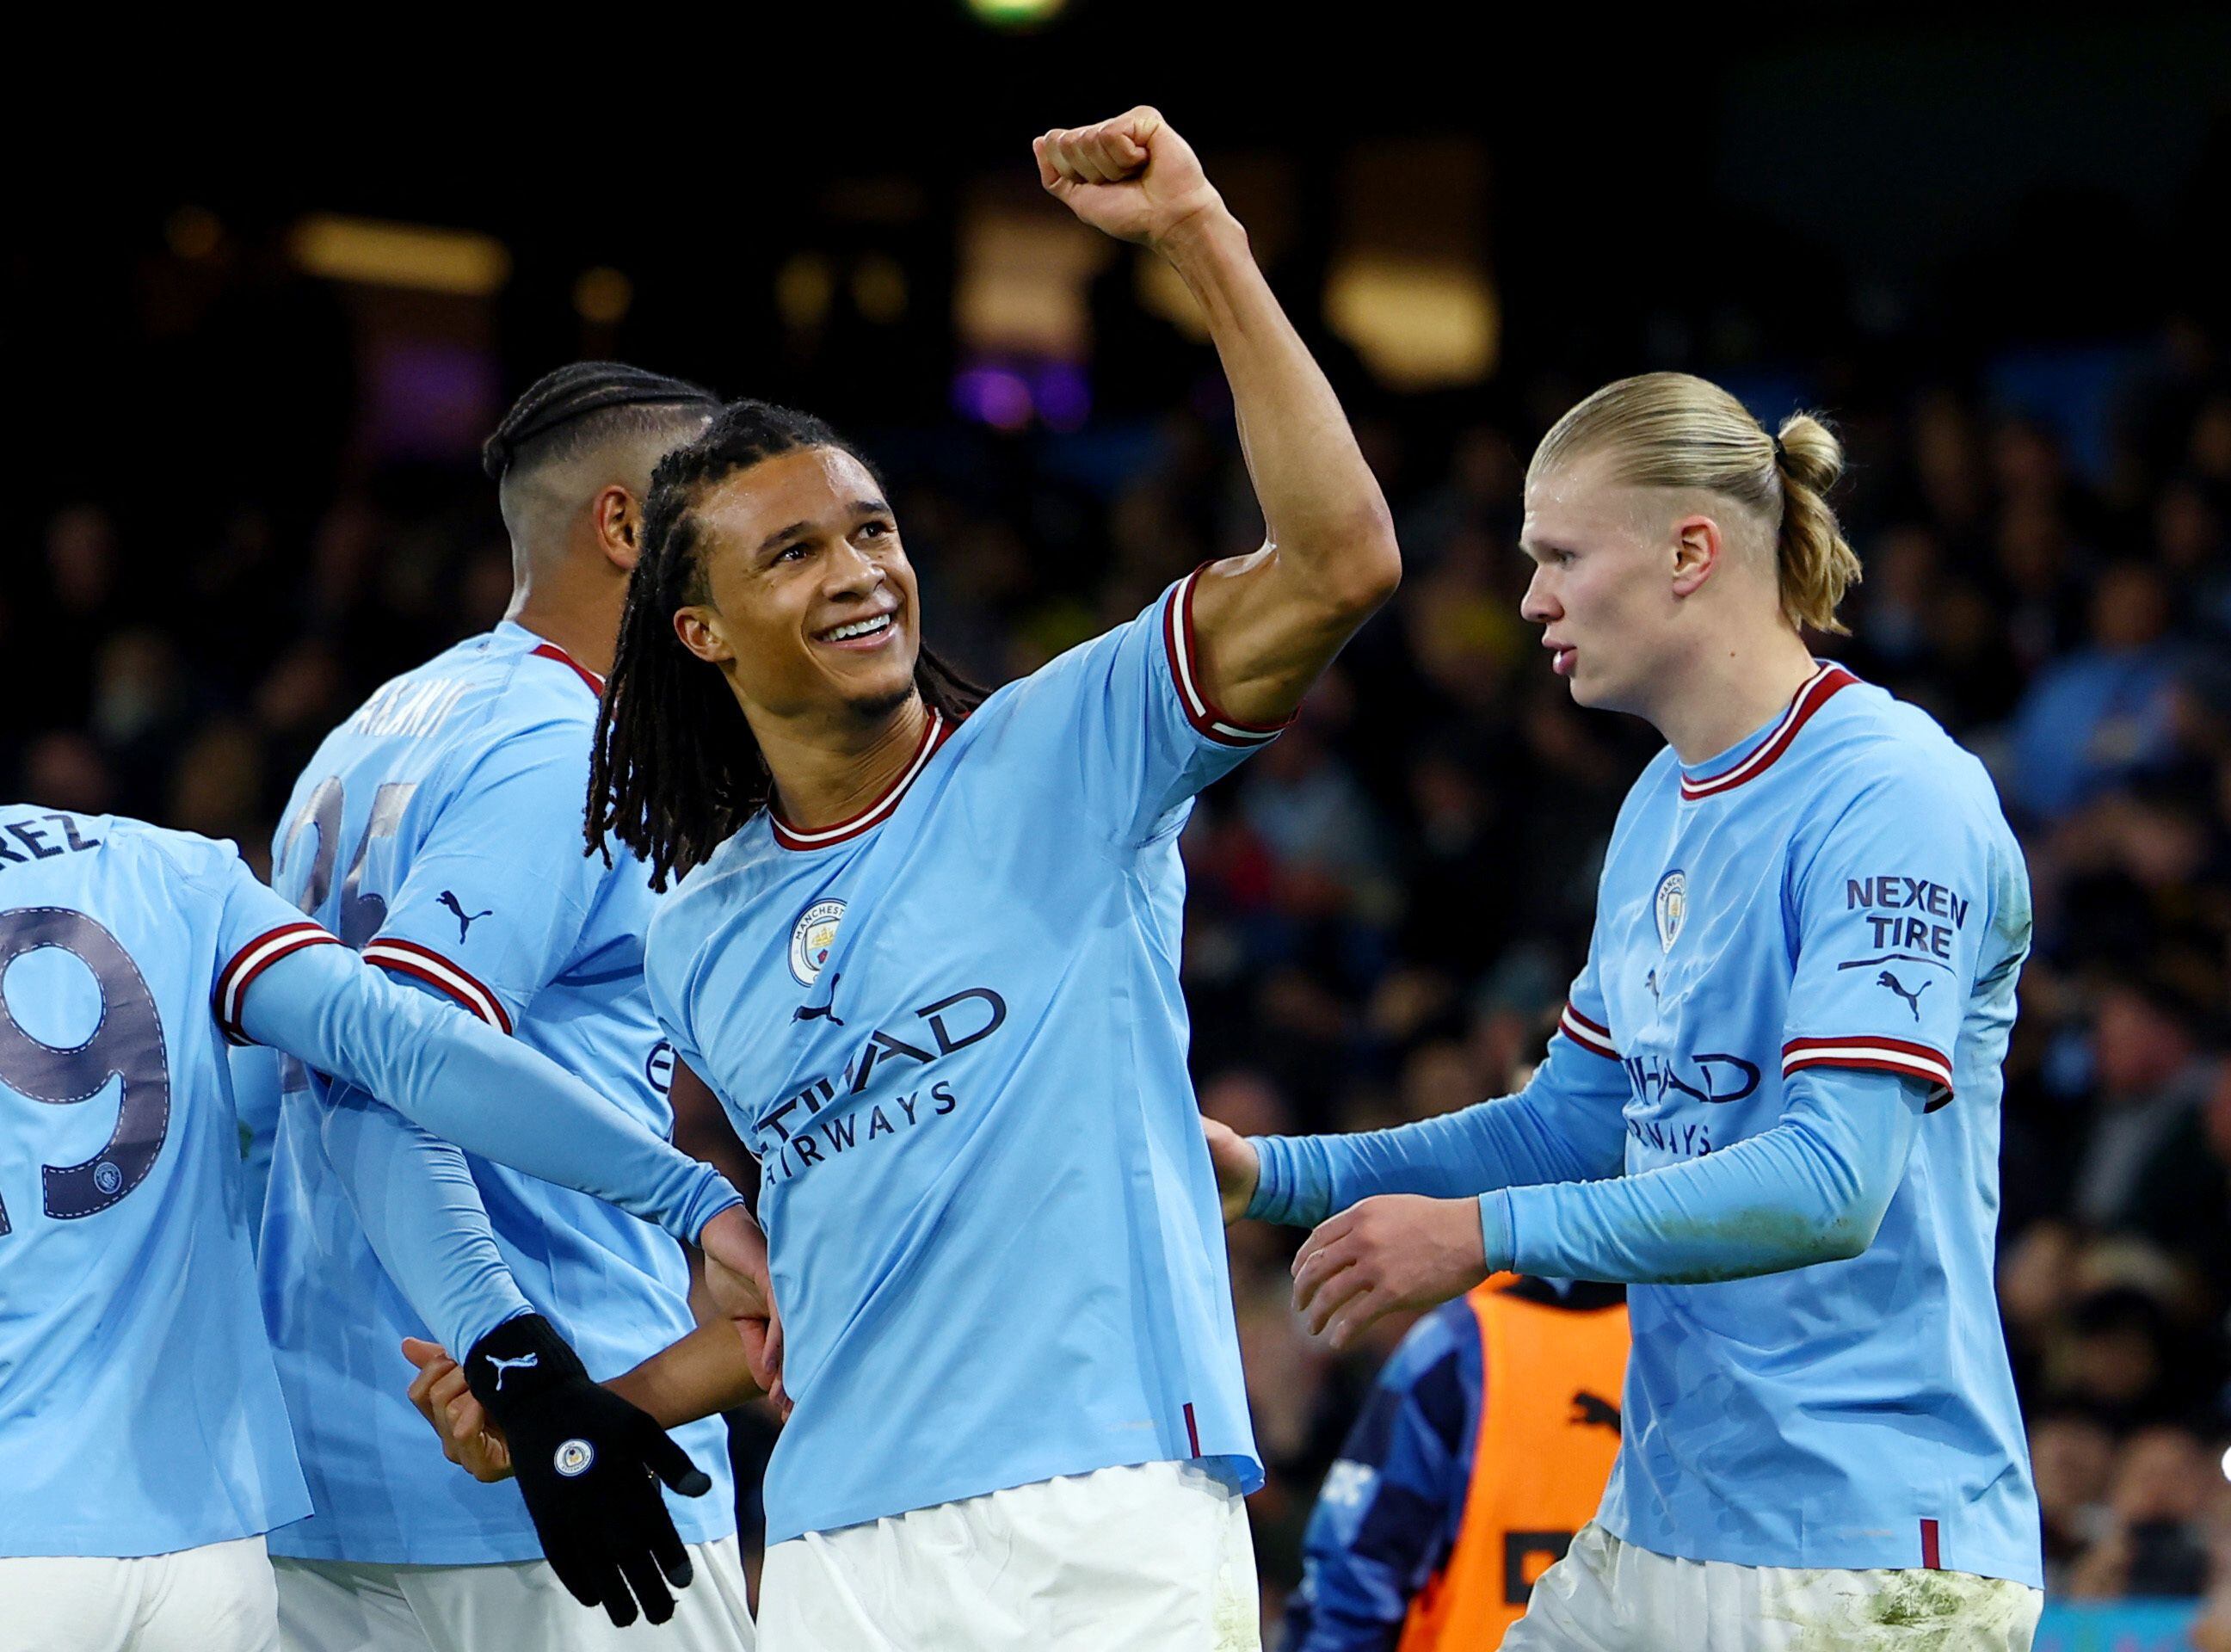 Soccer Football - FA Cup - Fourth Round - Manchester City v Arsenal - Etihad Stadium, Manchester, Britain - January 27, 2023 Manchester City's Nathan Ake celebrates scoring their first goal with teammates REUTERS/Molly Darlington